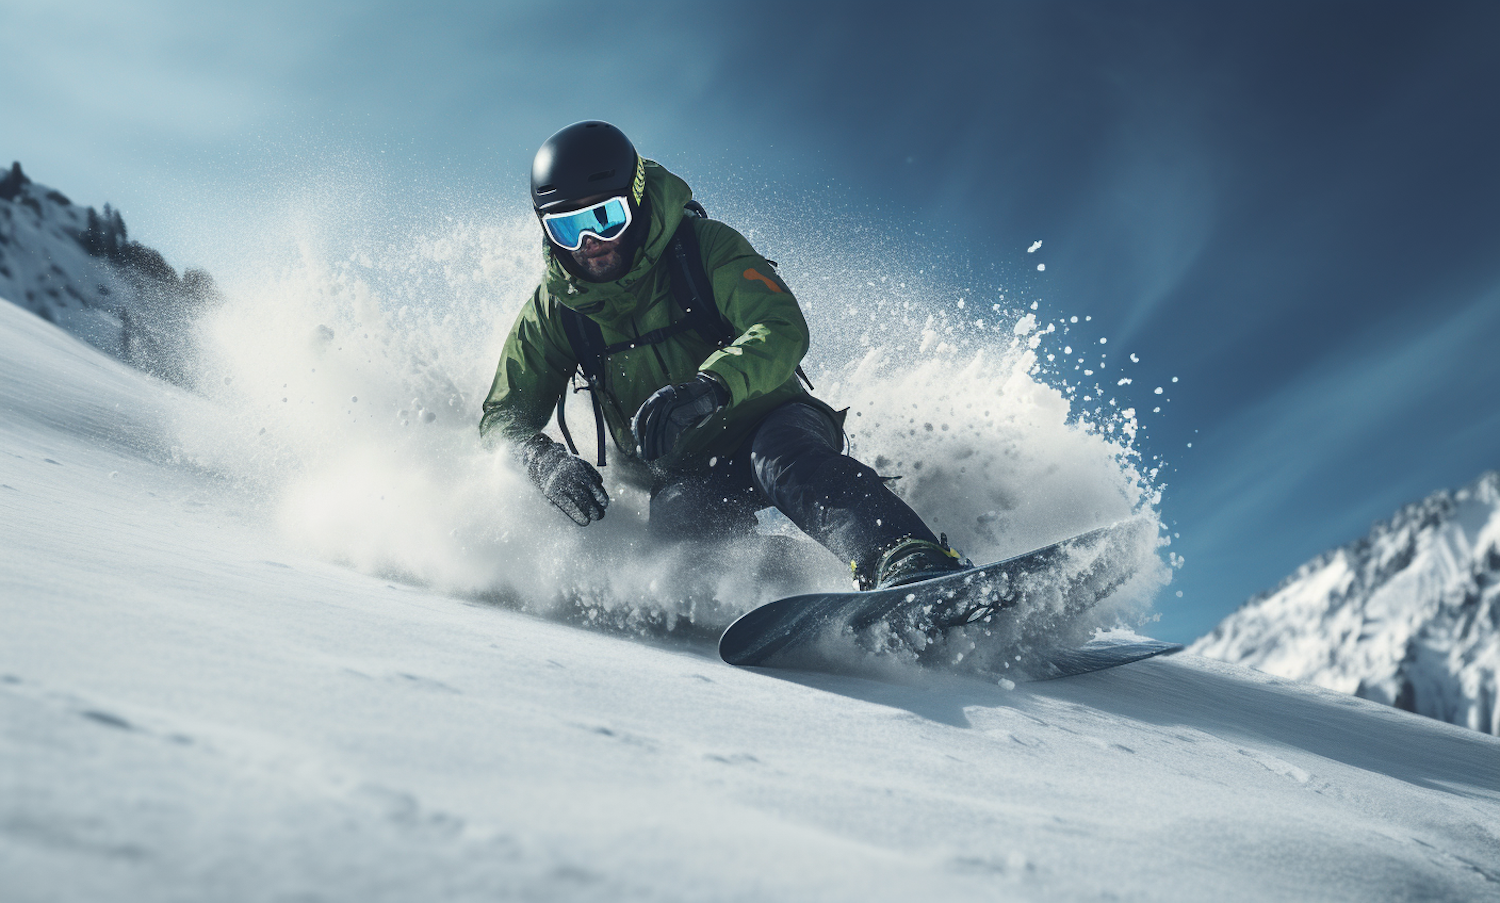 Dynamic Snowboarder Carving the Slopes